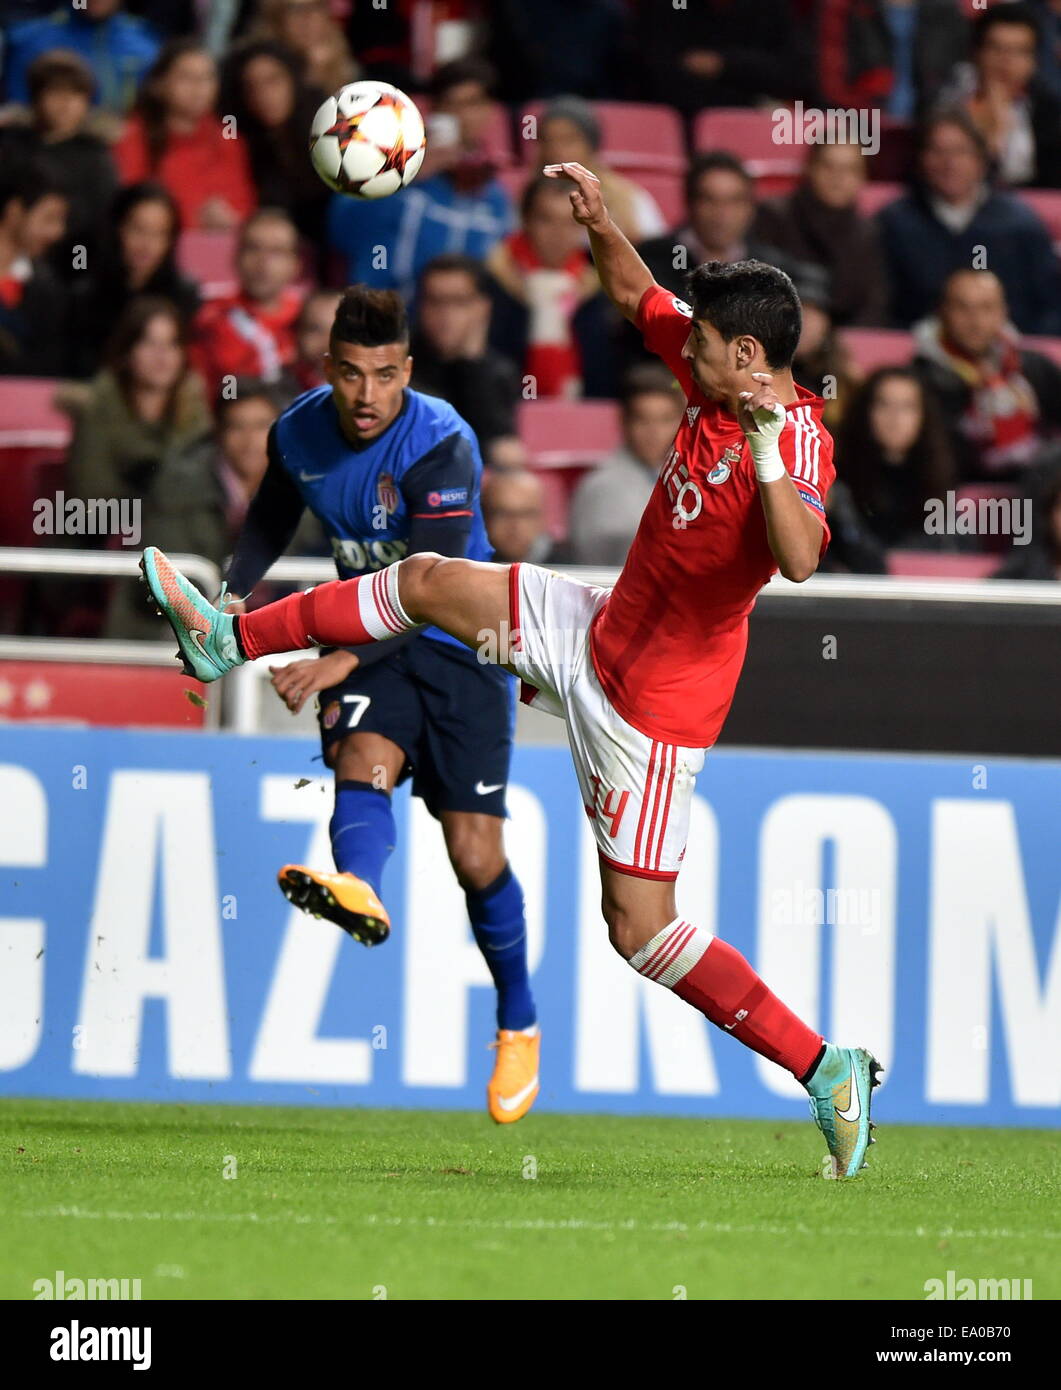 Lisbon, Portugal. 4th Nov, 2014. Andre Almeida (R) of Benfica vies for the ball during the Champions League Group C soccer match against Monaco in Lisbon, Portugal, on Nov. 4, 2014. Benfica won 1-0. Credit:  Zhang Liyun/Xinhua/Alamy Live News Stock Photo